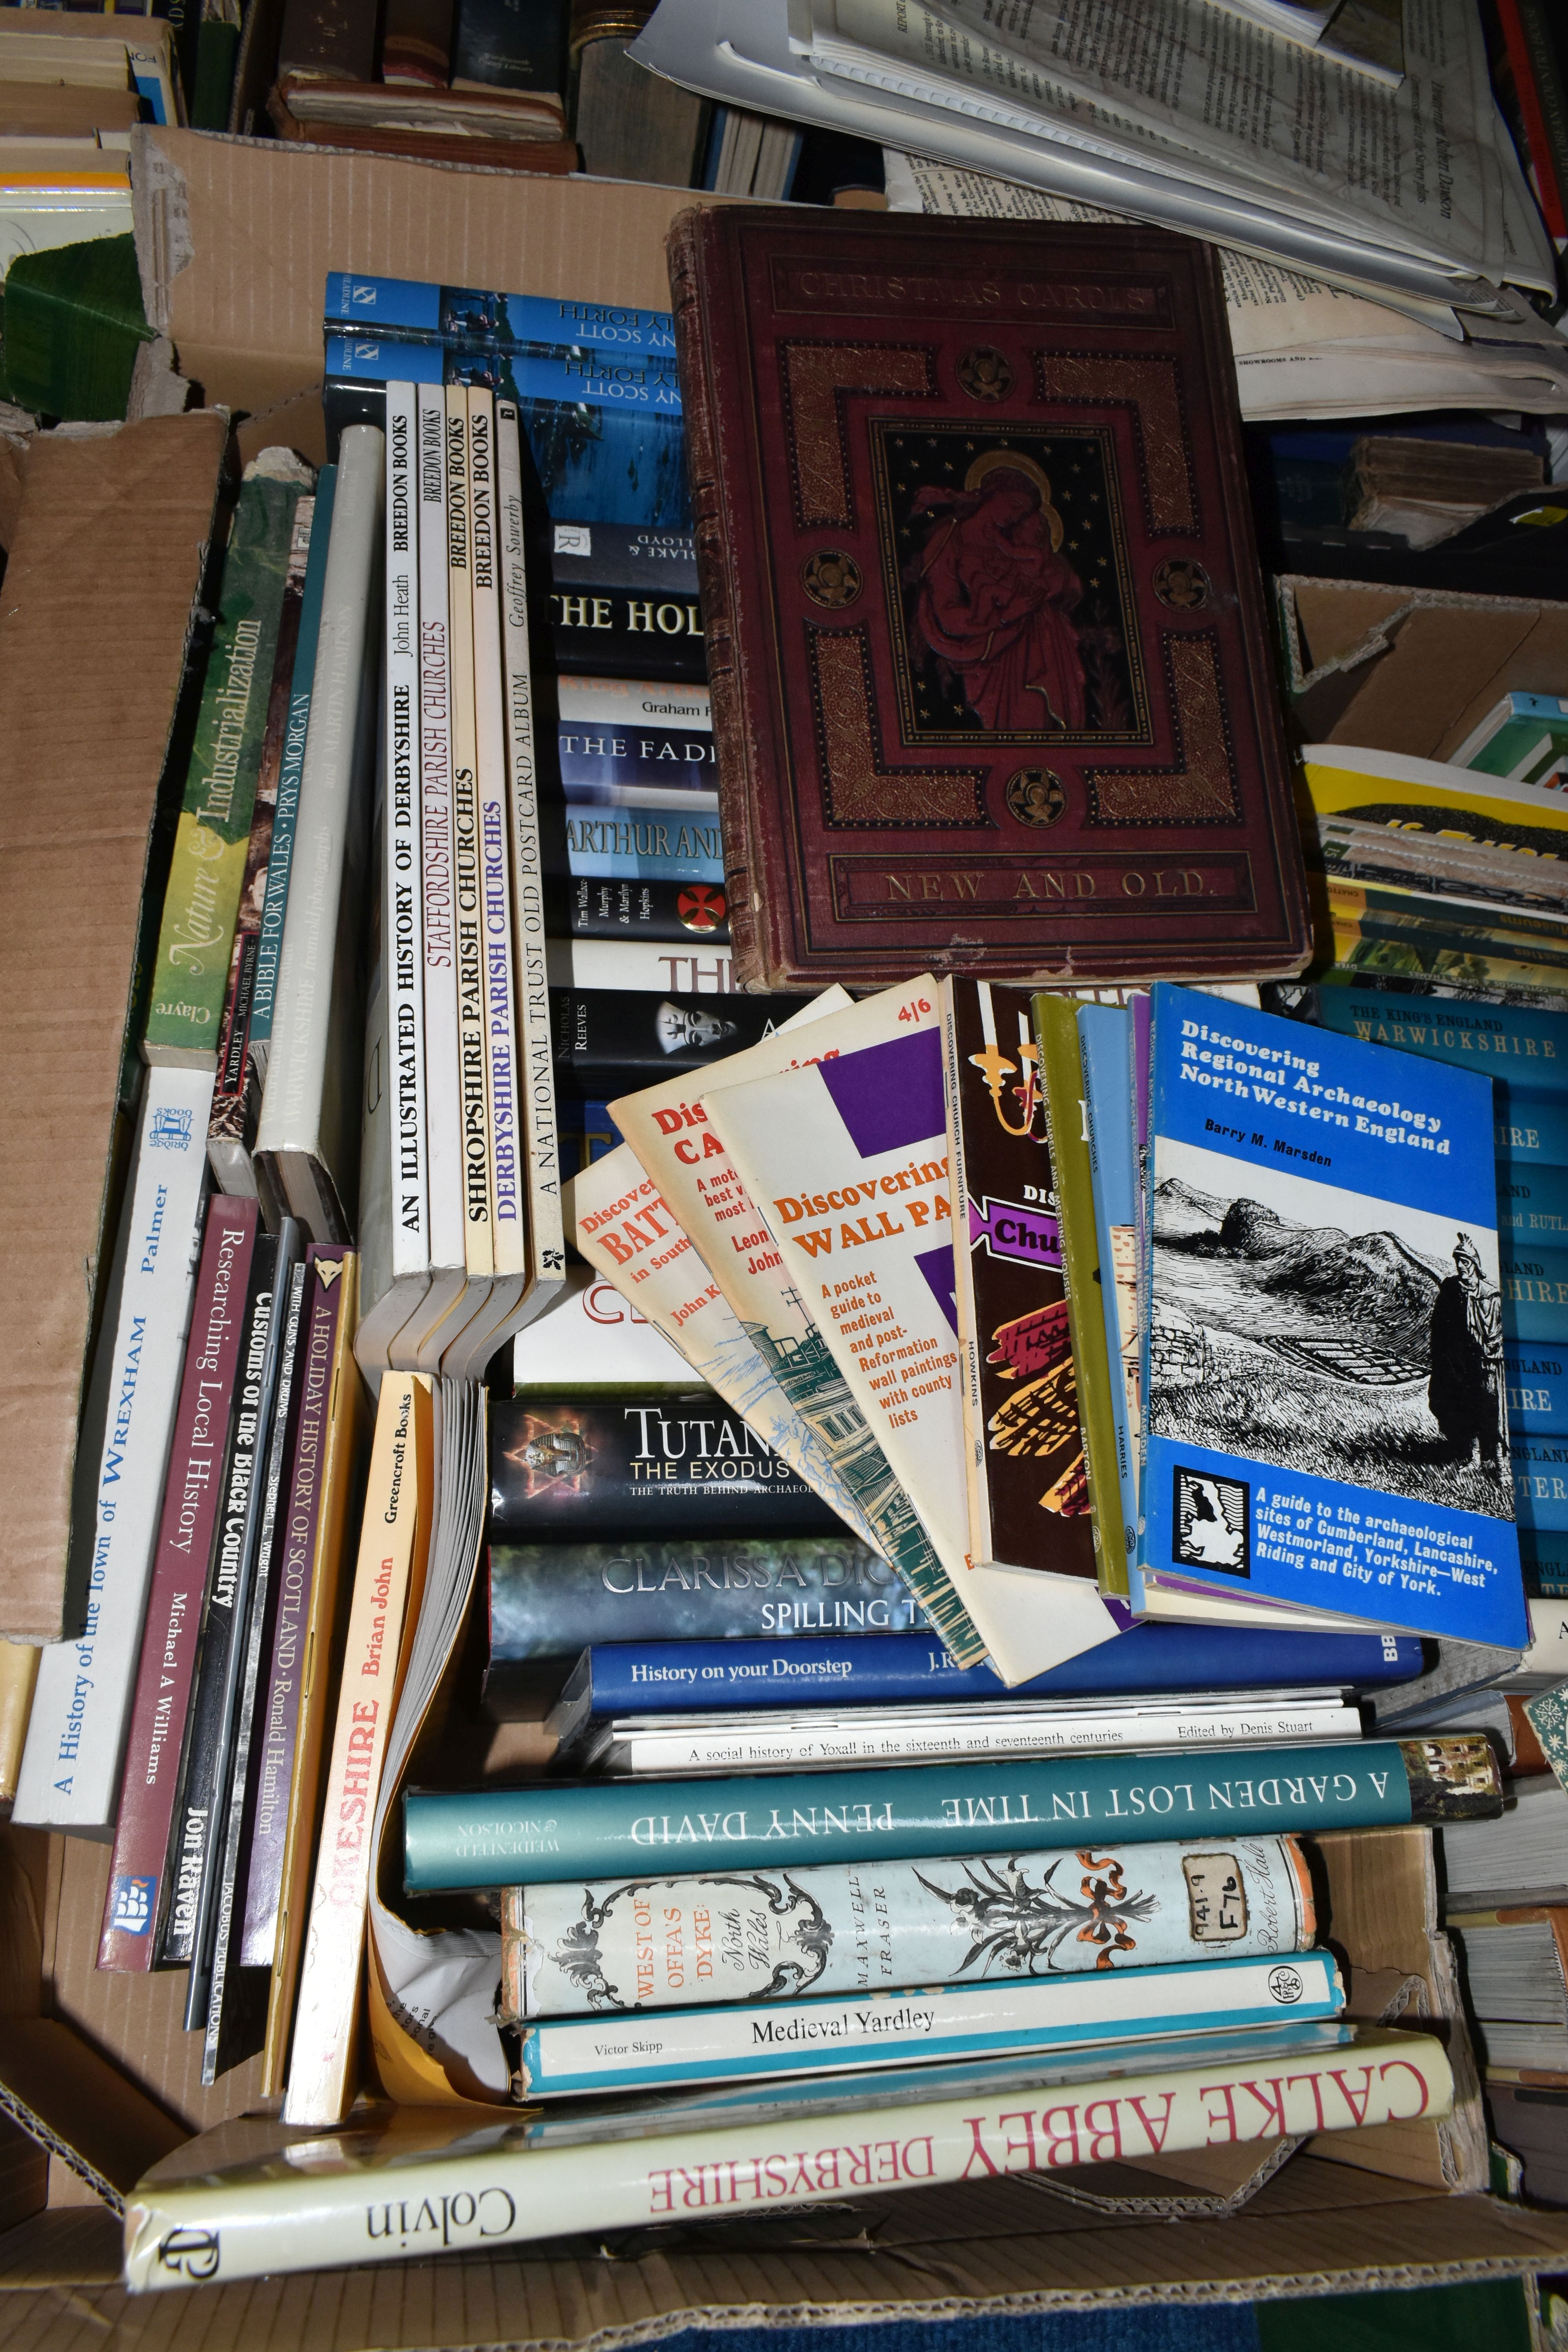 SIX BOXES OF BOOKS, over one hundred books, to include mostly British history, architectural - Image 4 of 7